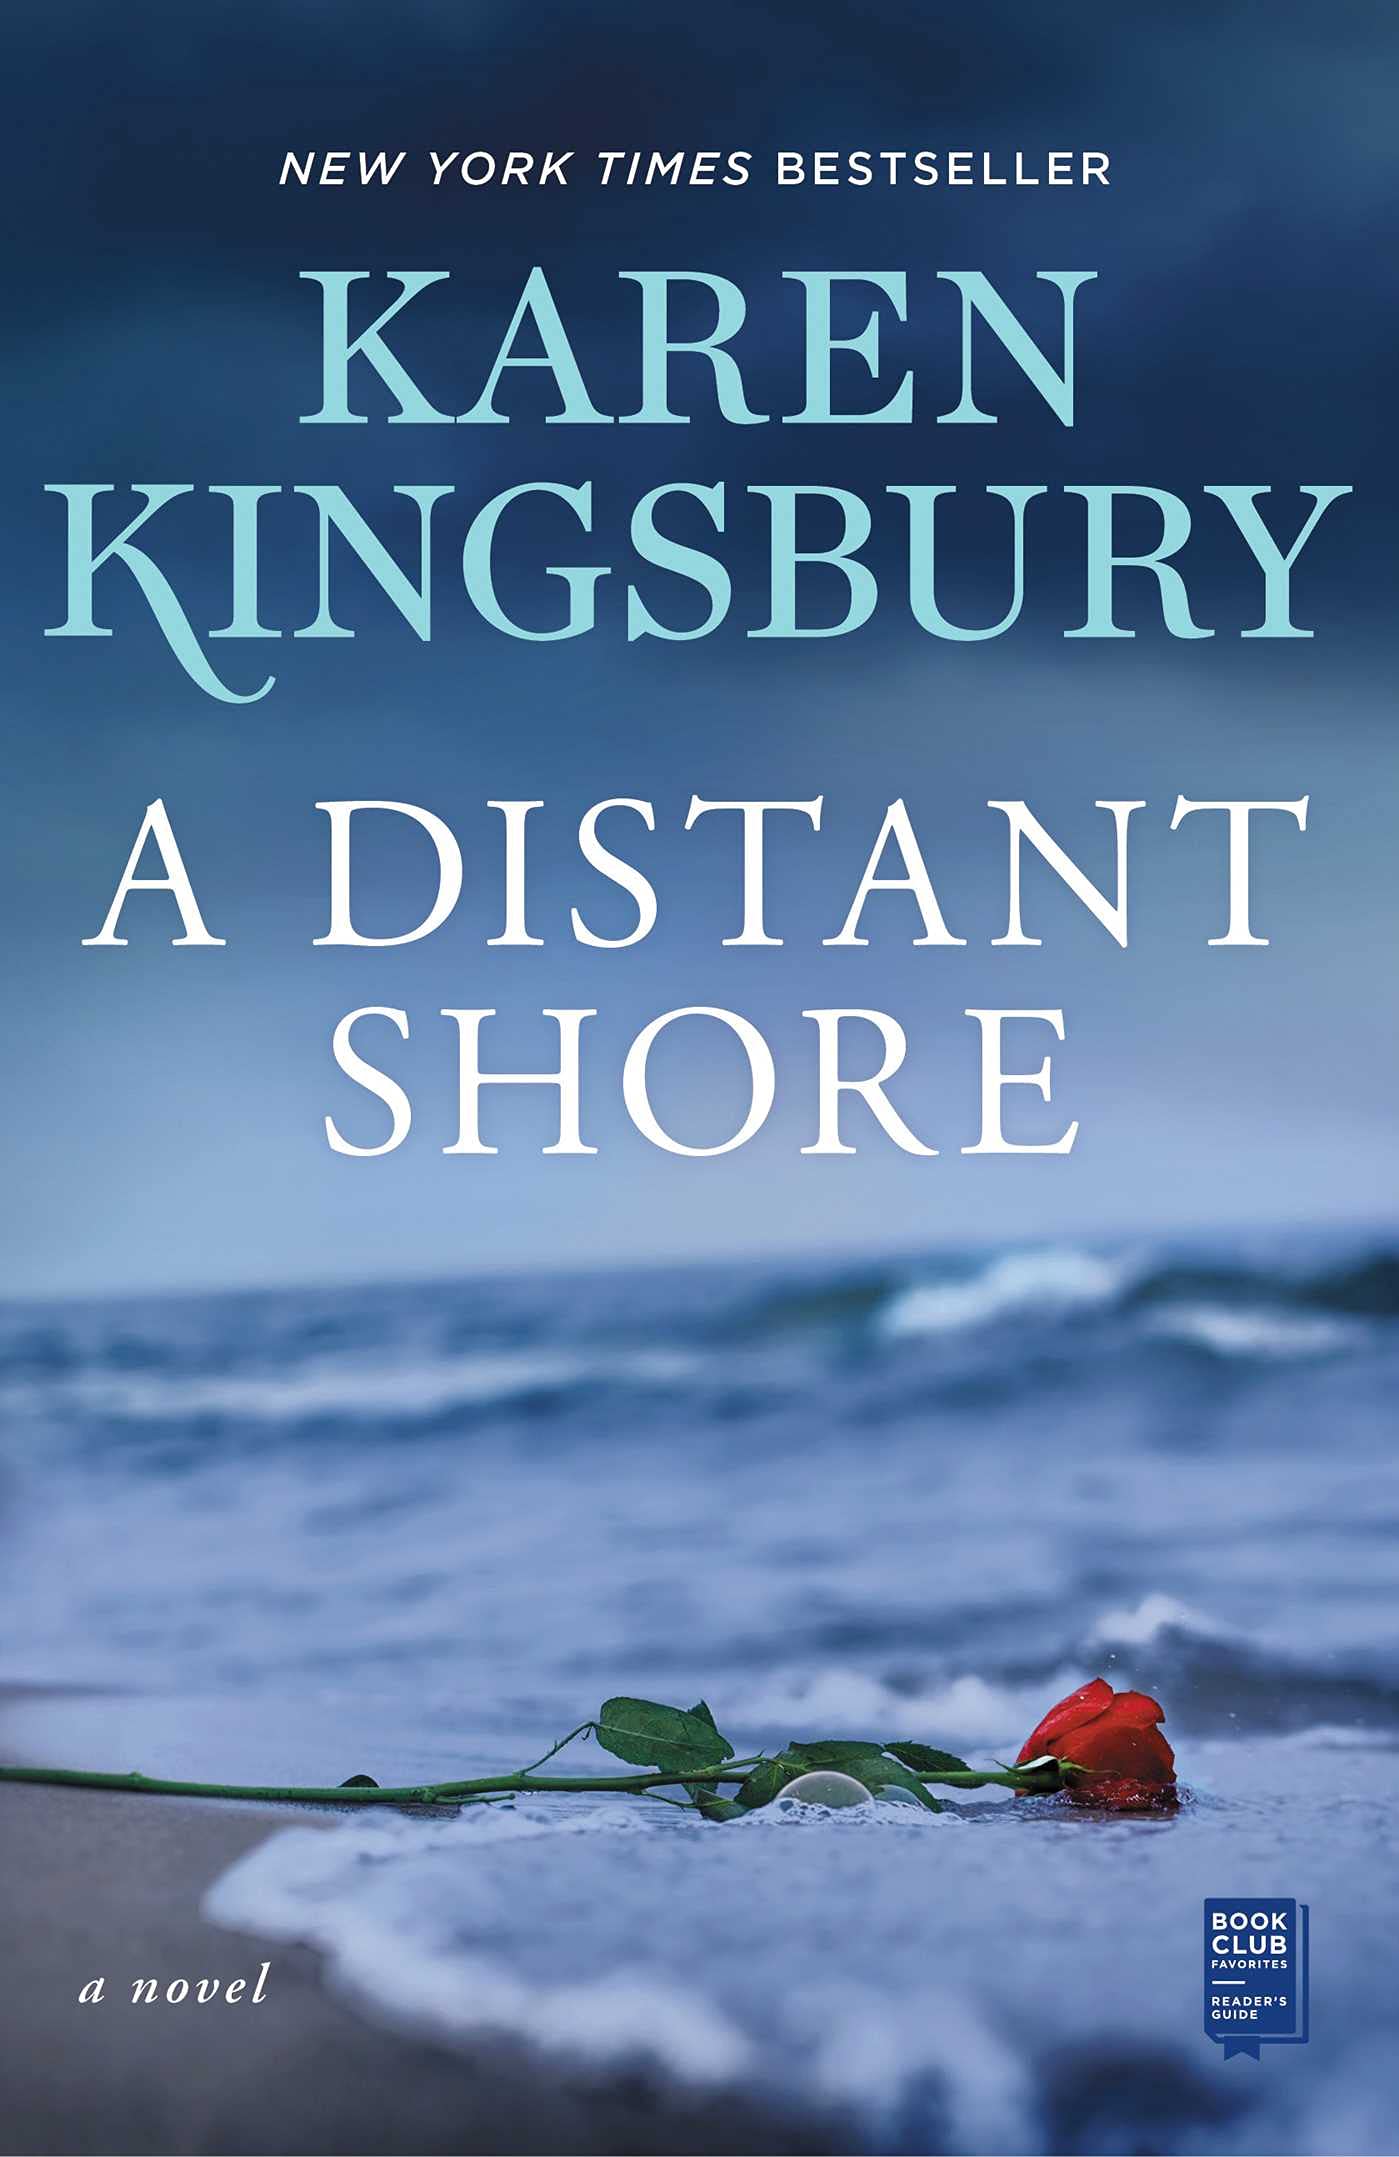 Image for "A Distant Shore"